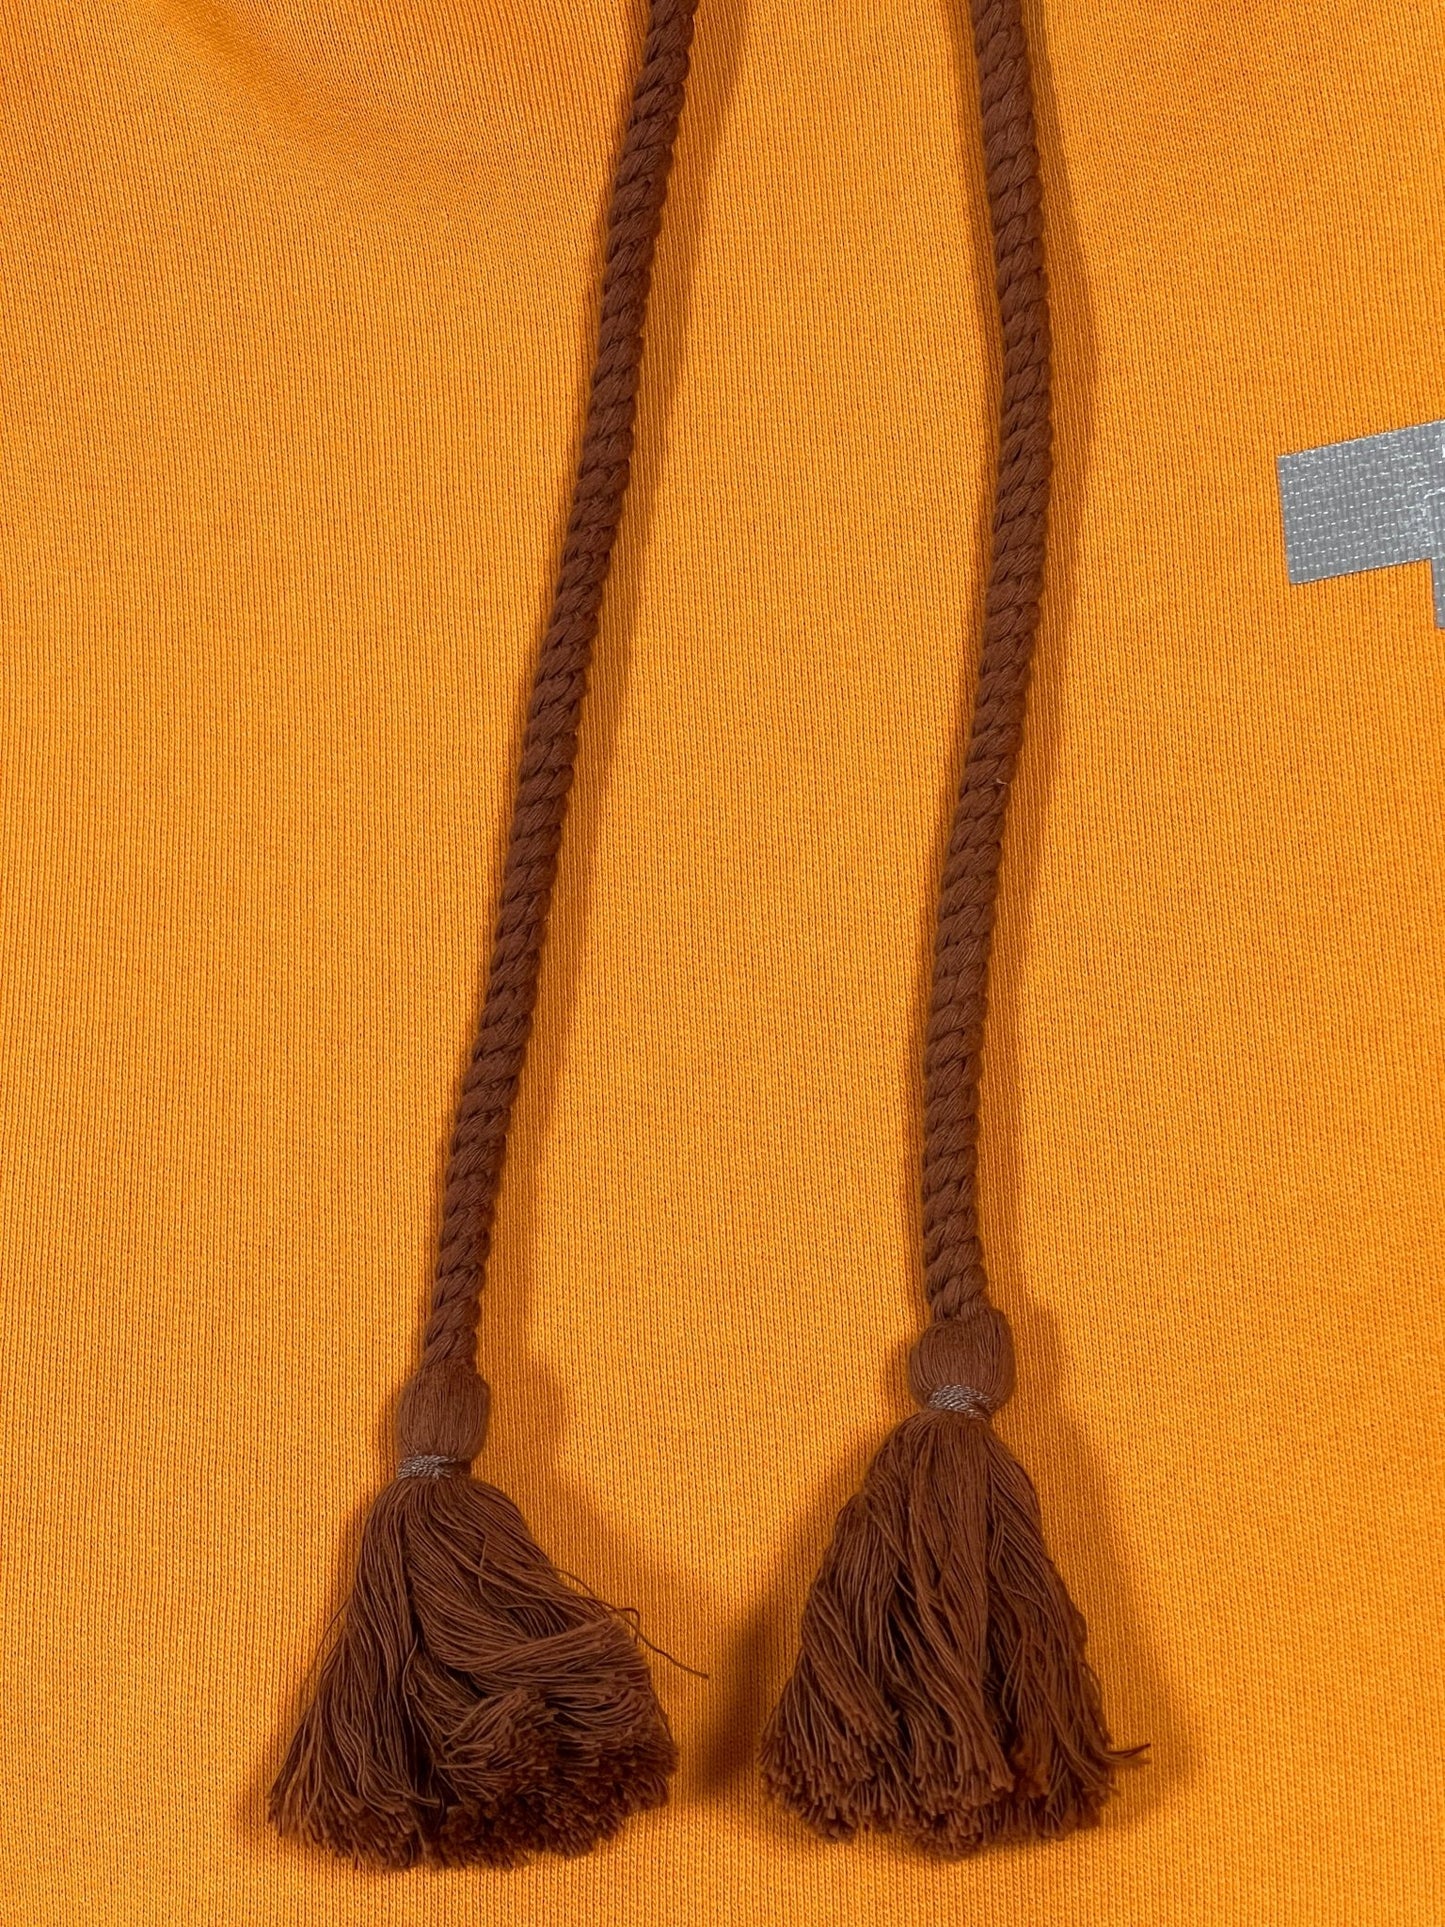 Two AL AIN tassels with a thick rope texture lace hanging against an AL AIN fabric background.